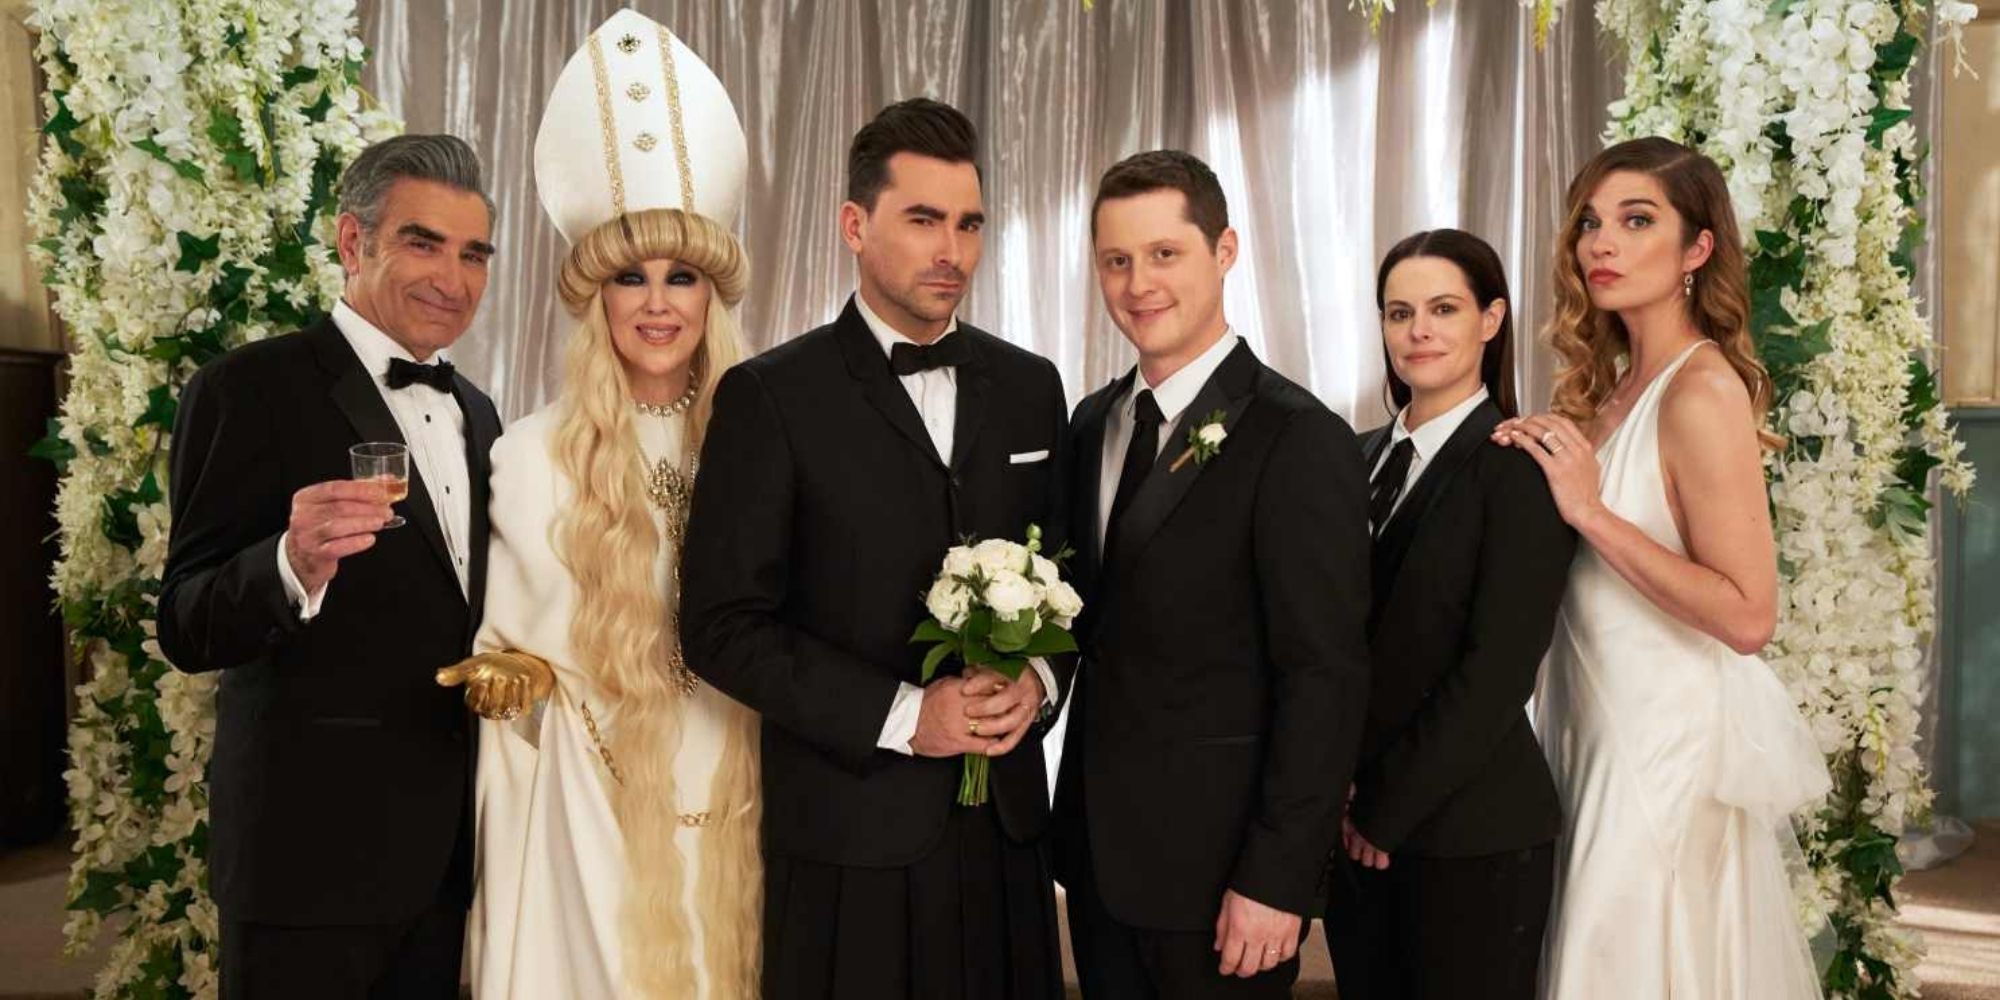 The Rose family and Stevie posing together at David and Patrick's wedding in Schitt's Creek.